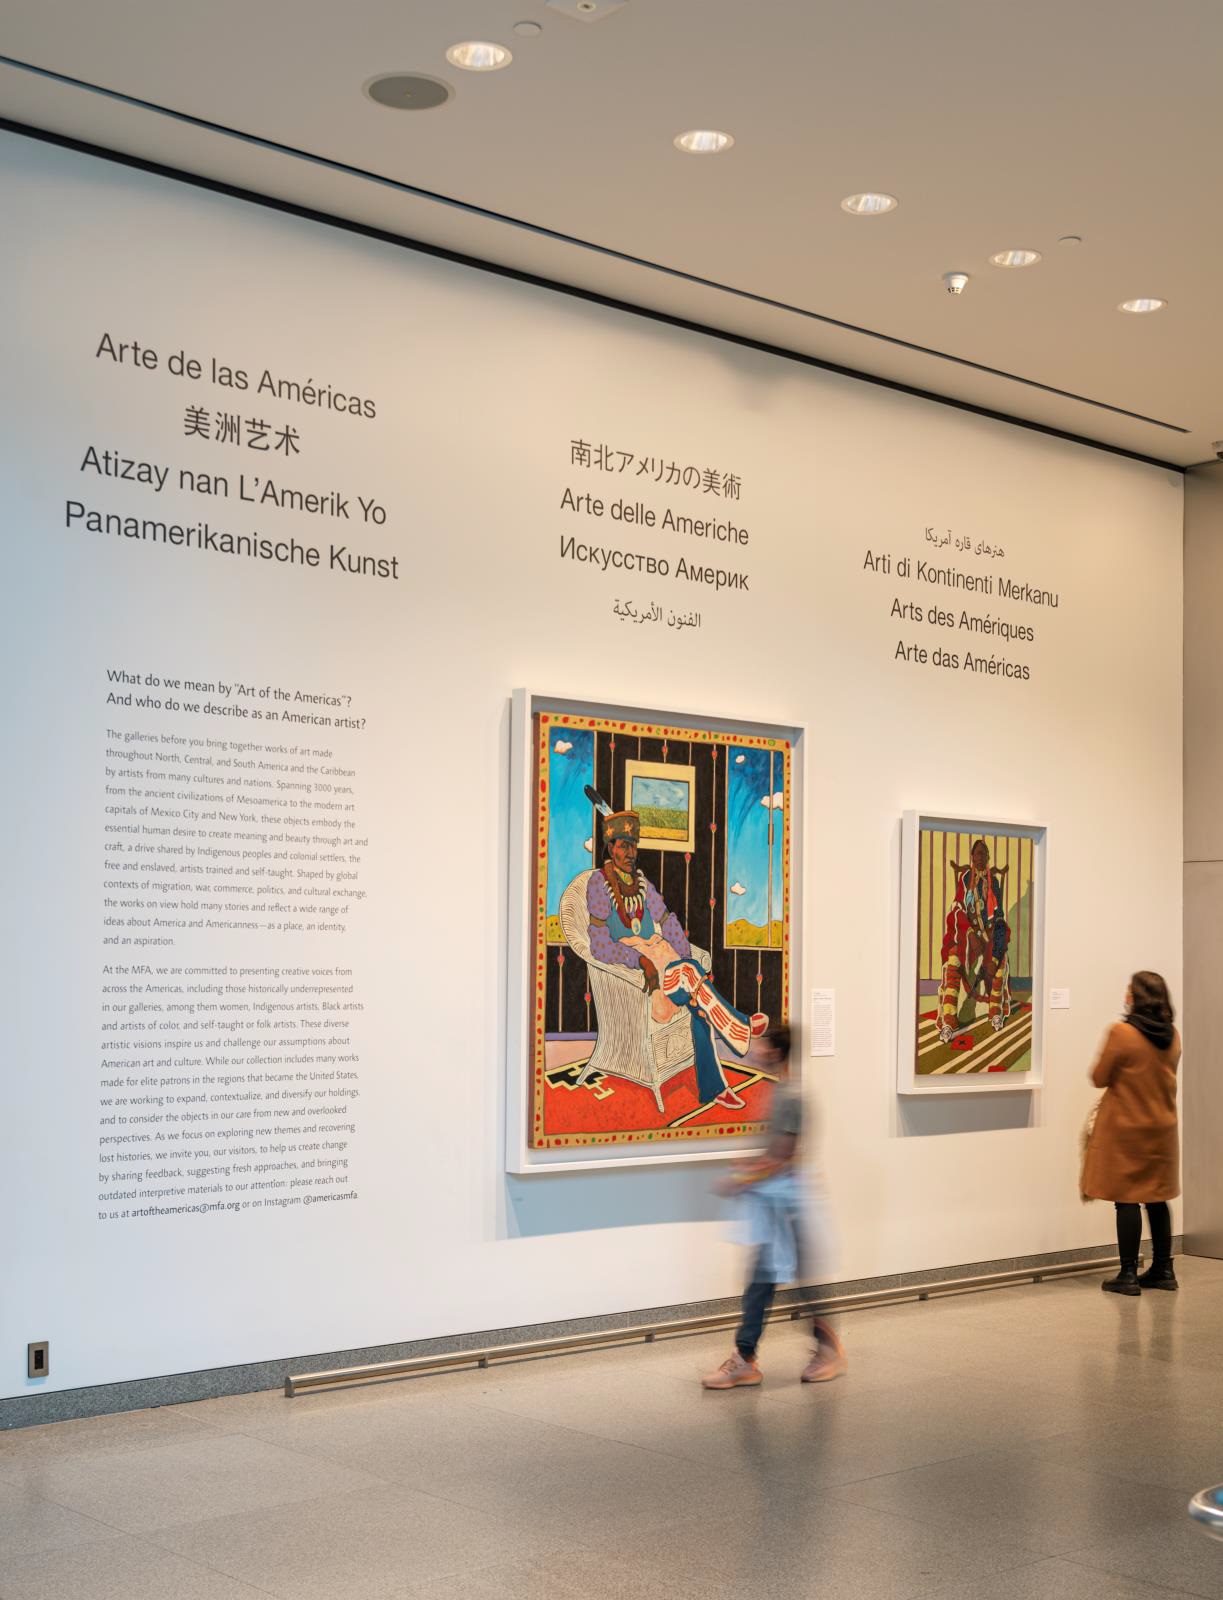 Photograph of entrance wall to museum exhibit gallery, with two figures standing in front of two paintings and a text panel, over which is the title "Arte de las Americas" in several languages